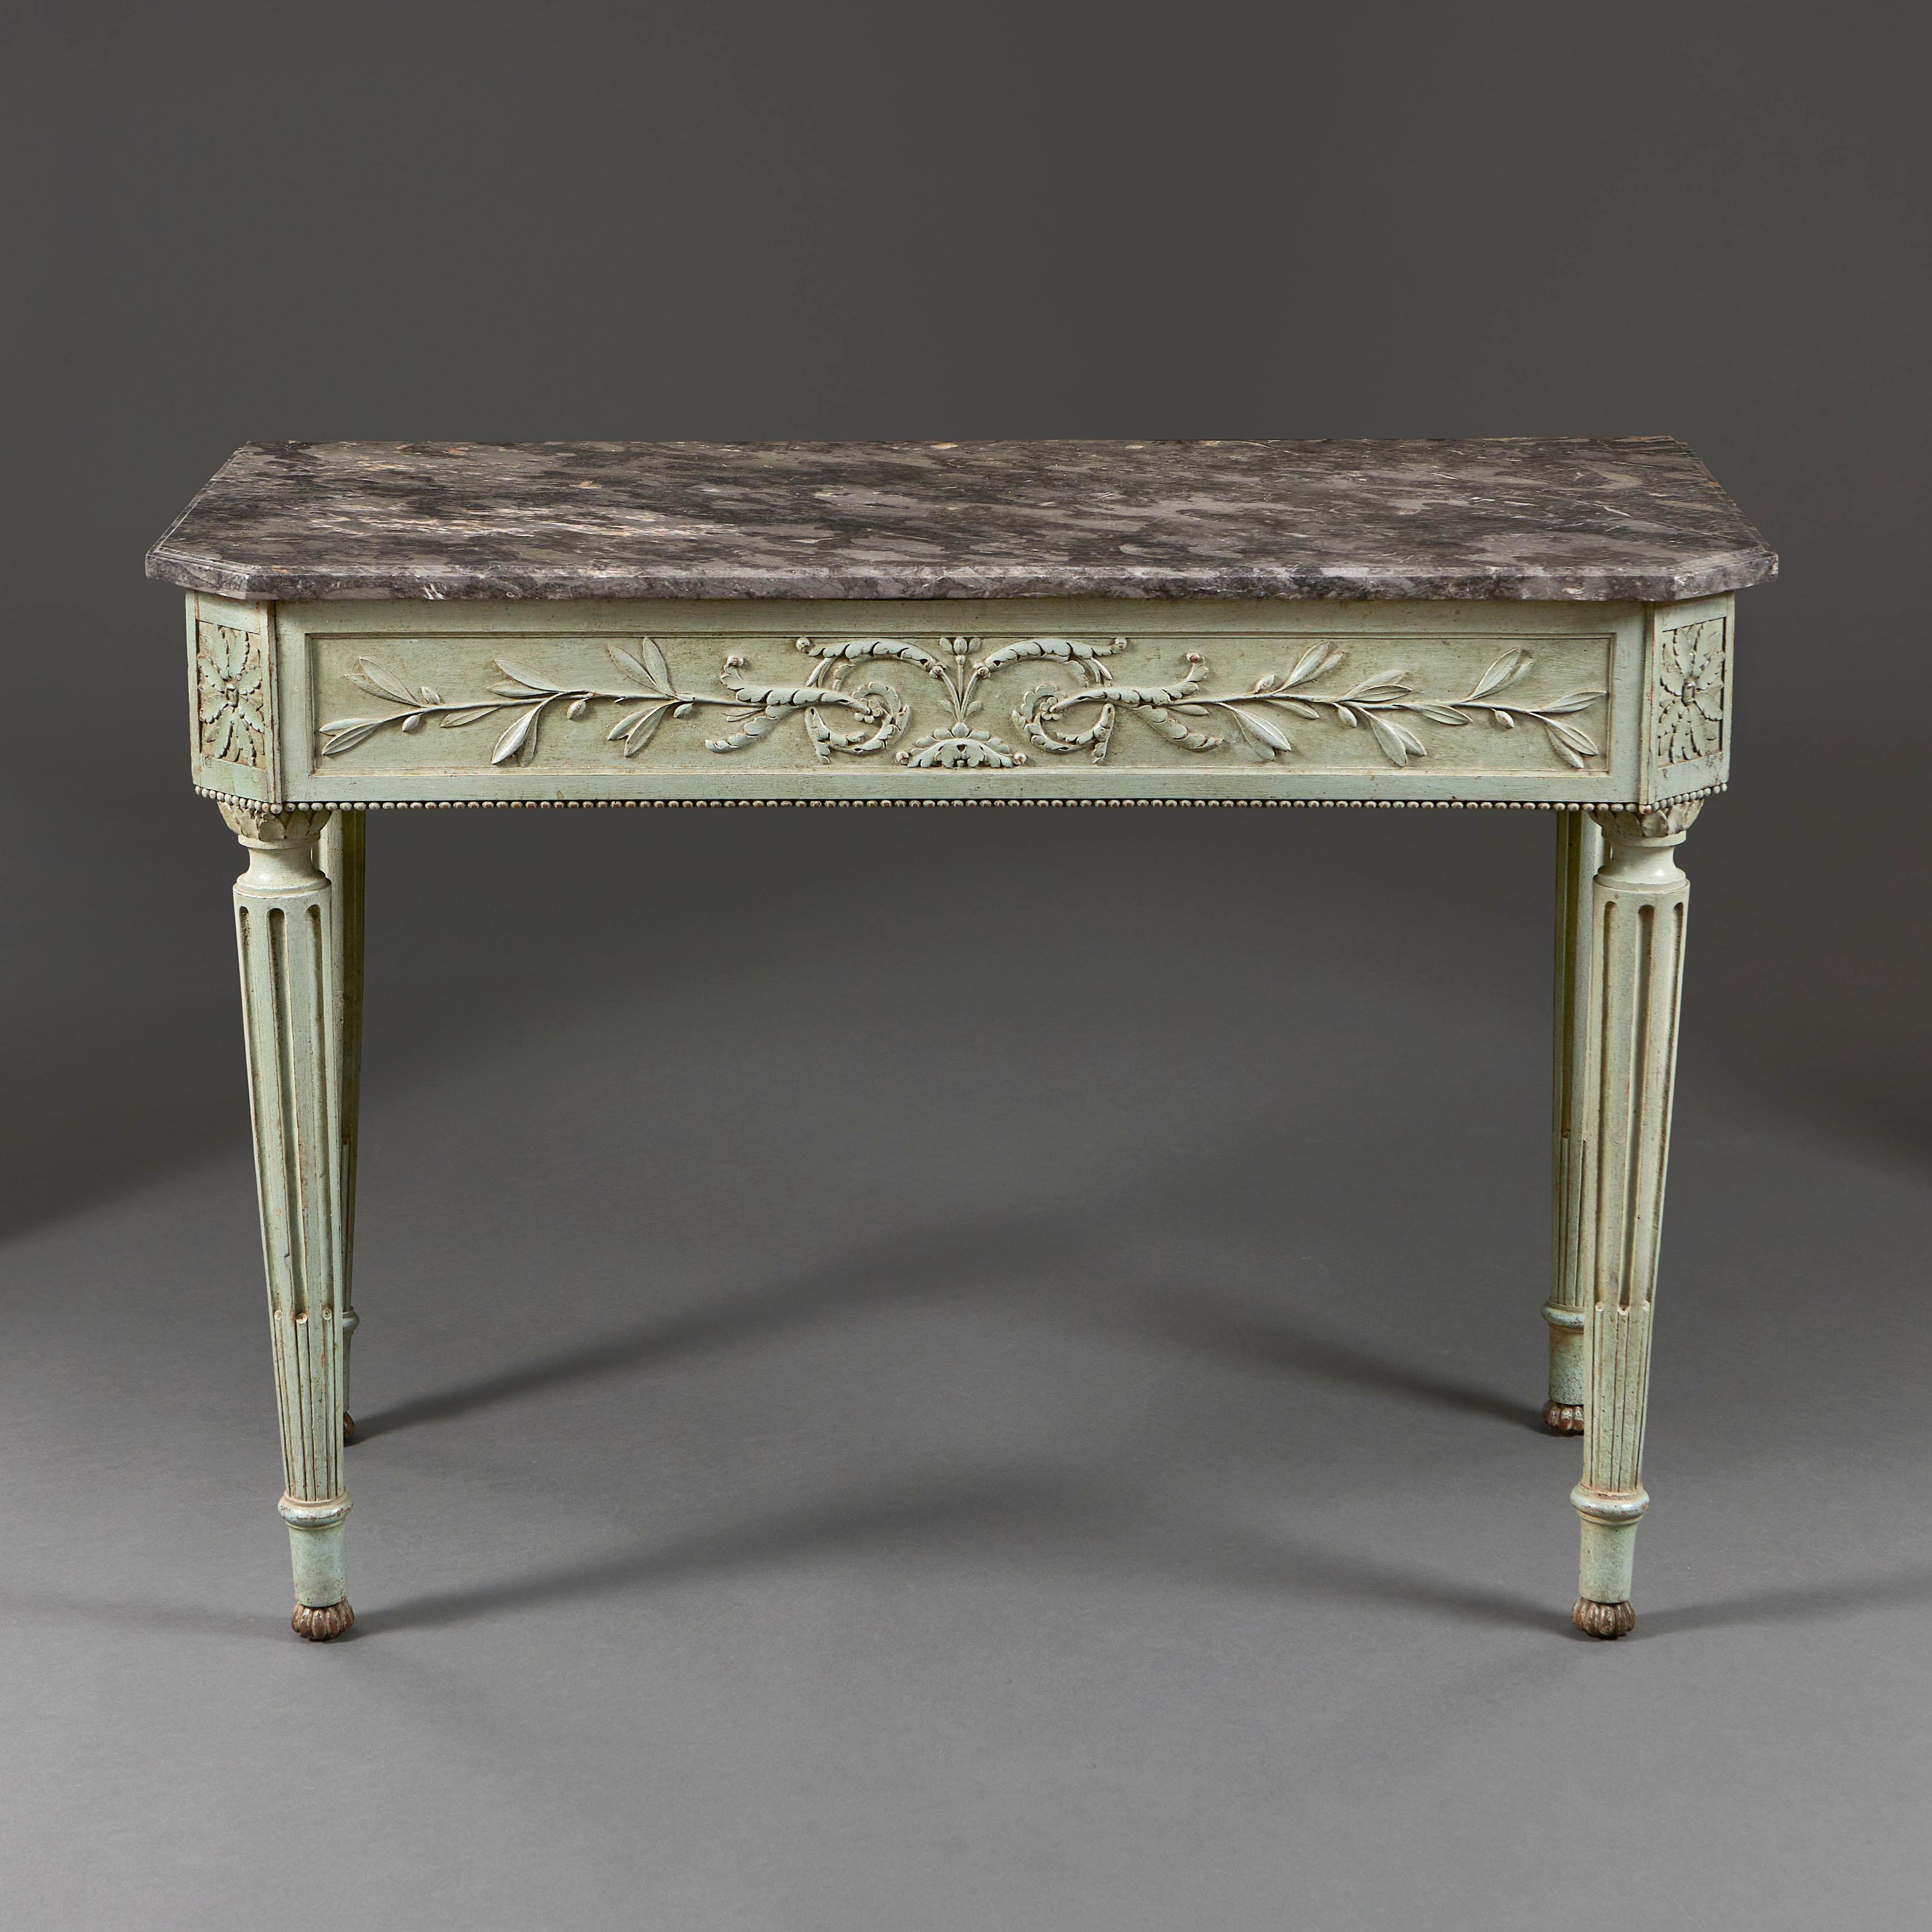 A French Late 18th Century Blue Painted Console Table with Grey Marble Top In Good Condition For Sale In London, GB